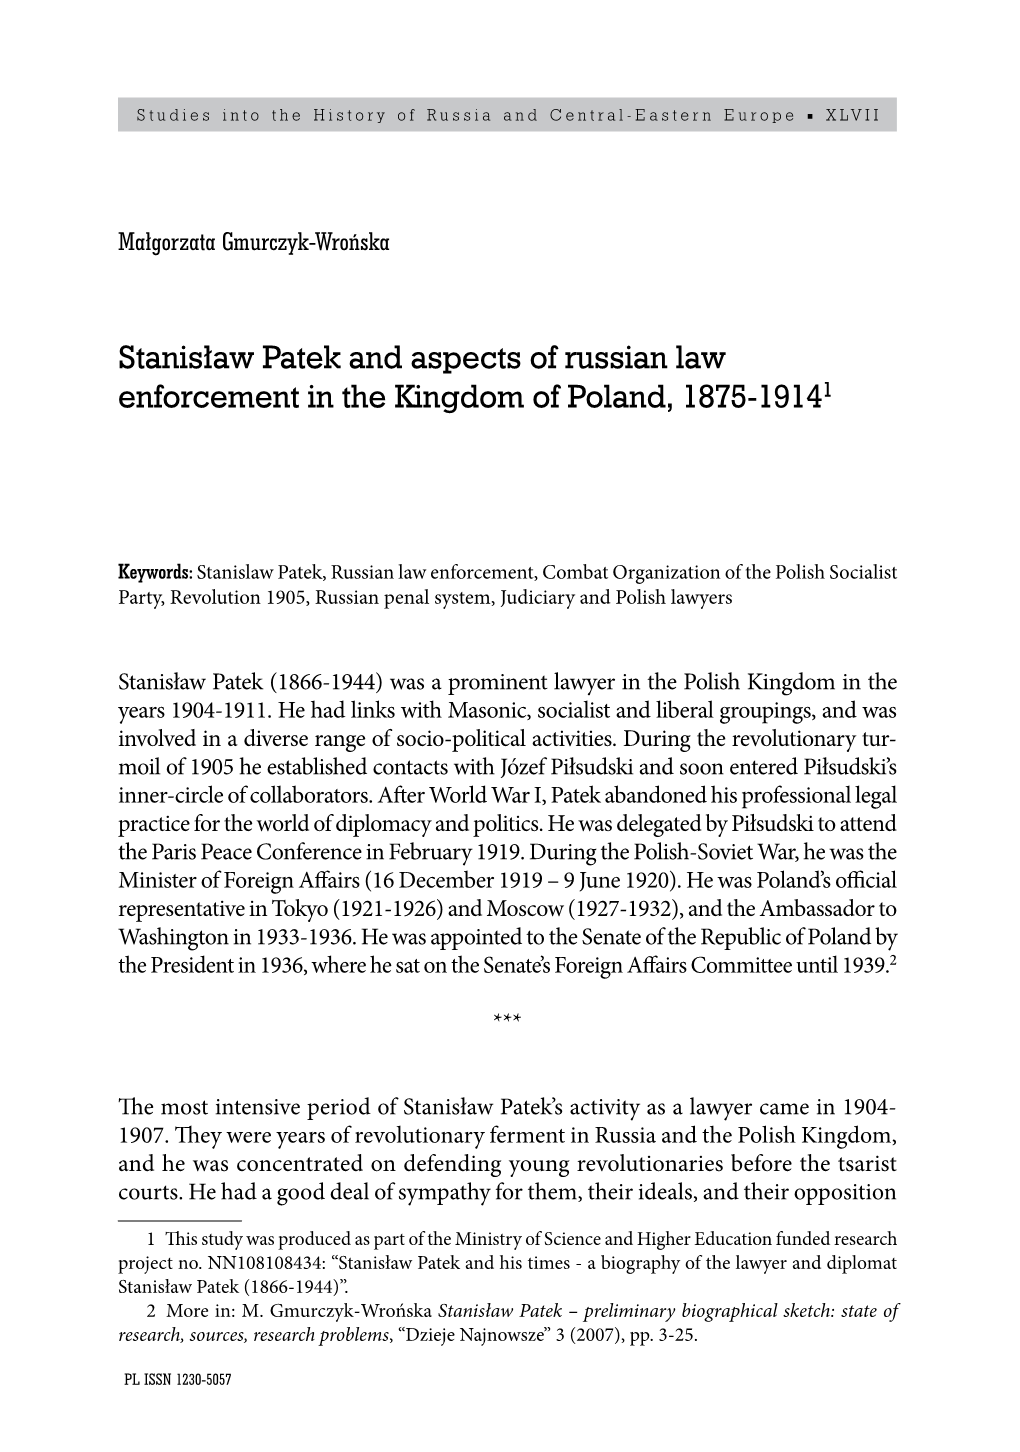 Stanisław Patek and Aspects of Russian Law Enforcement in the Kingdom of Poland, 1875-19141